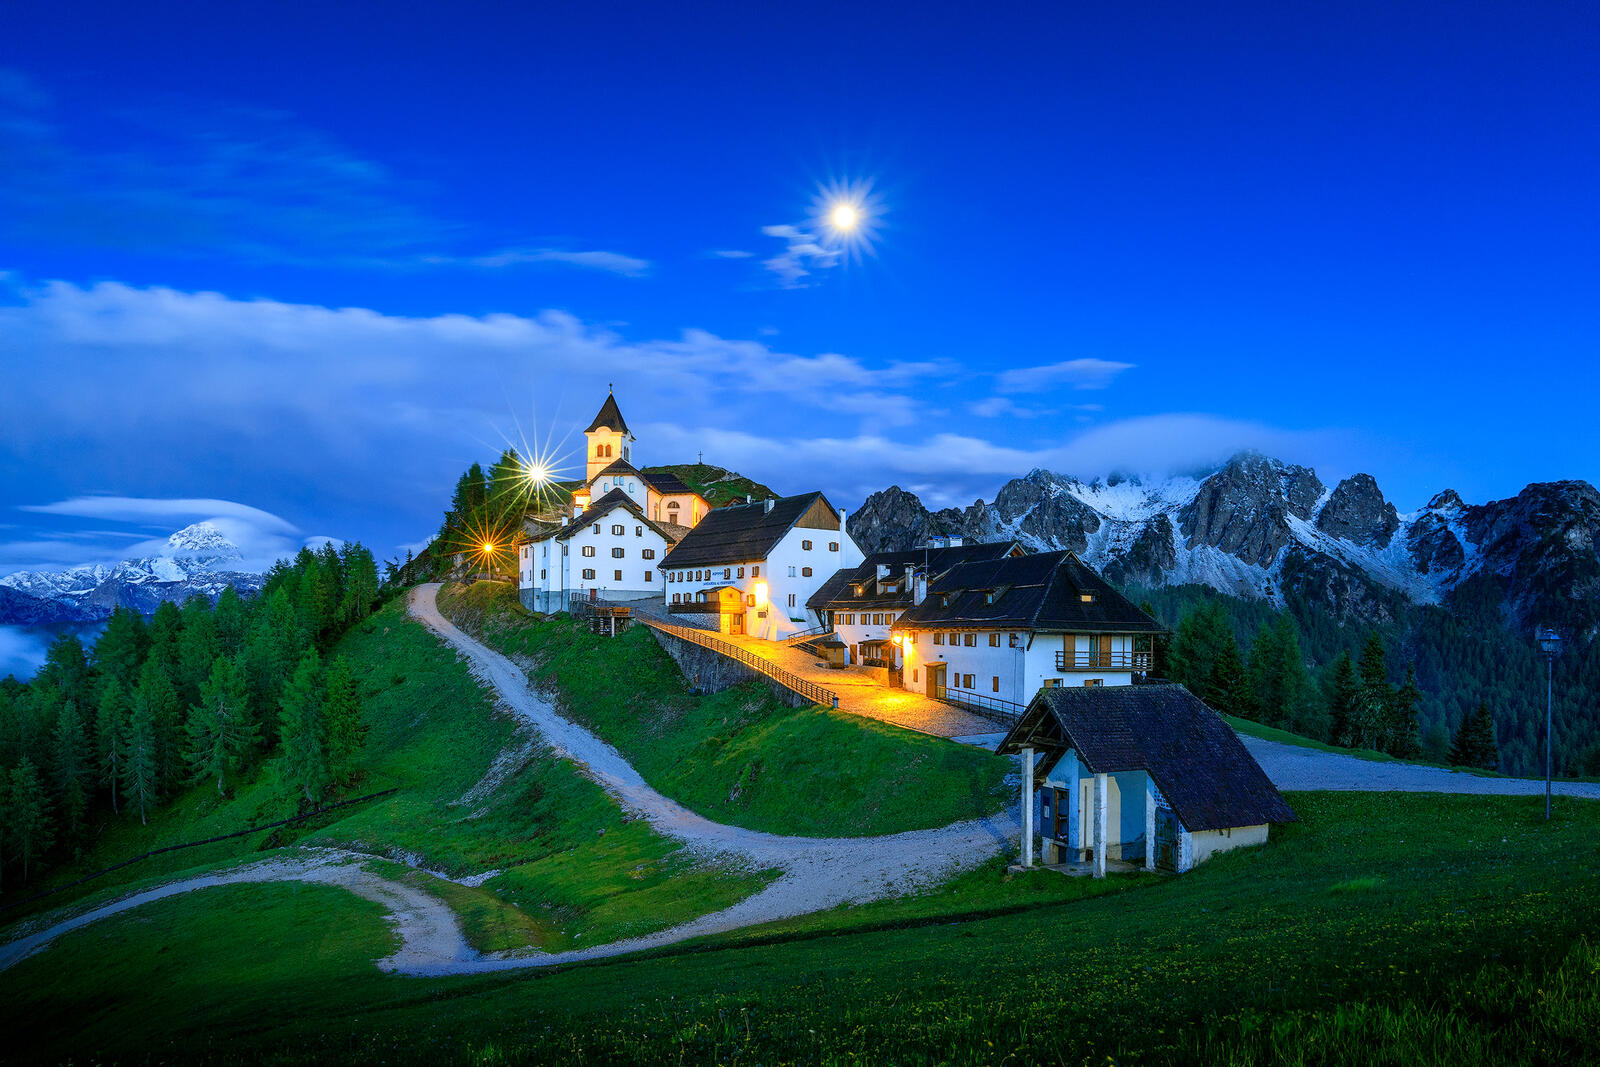 Wallpapers Moonrise over Monte Lussari Italy buildings on the desktop